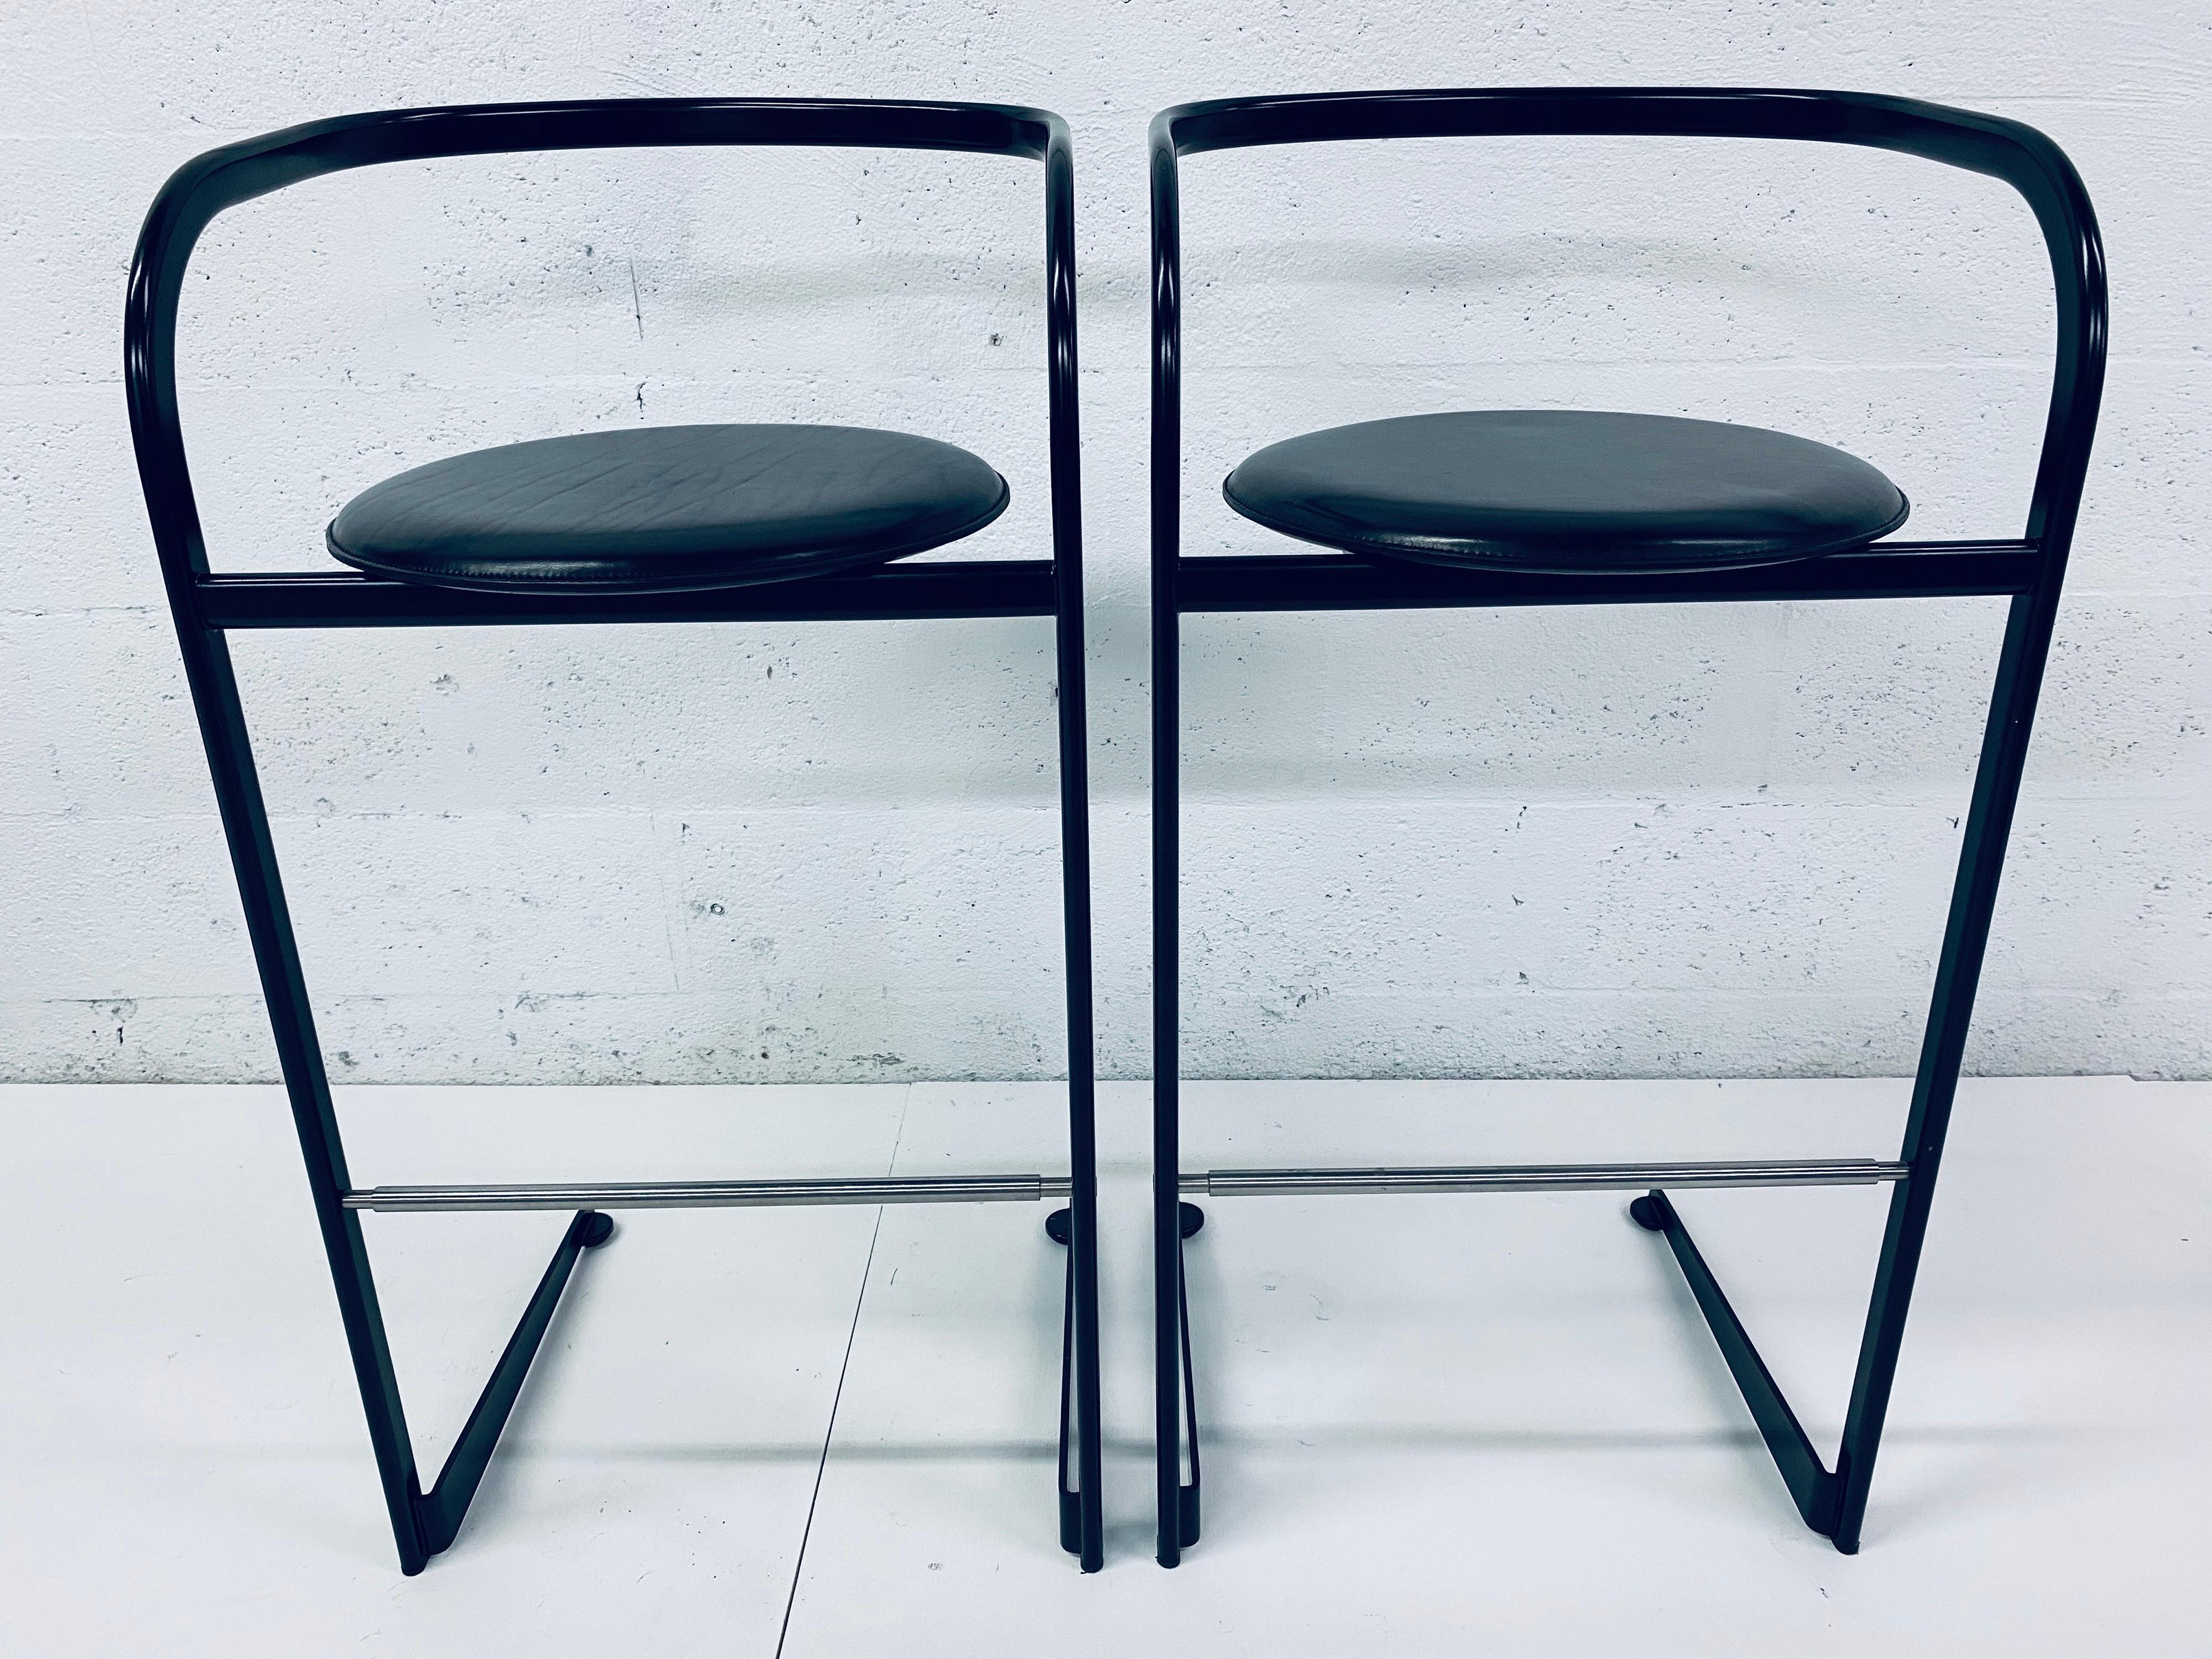 Pair of bar stools by Toshiyuki Kita for ICF by Atelier with eco-leather covered foam seat.